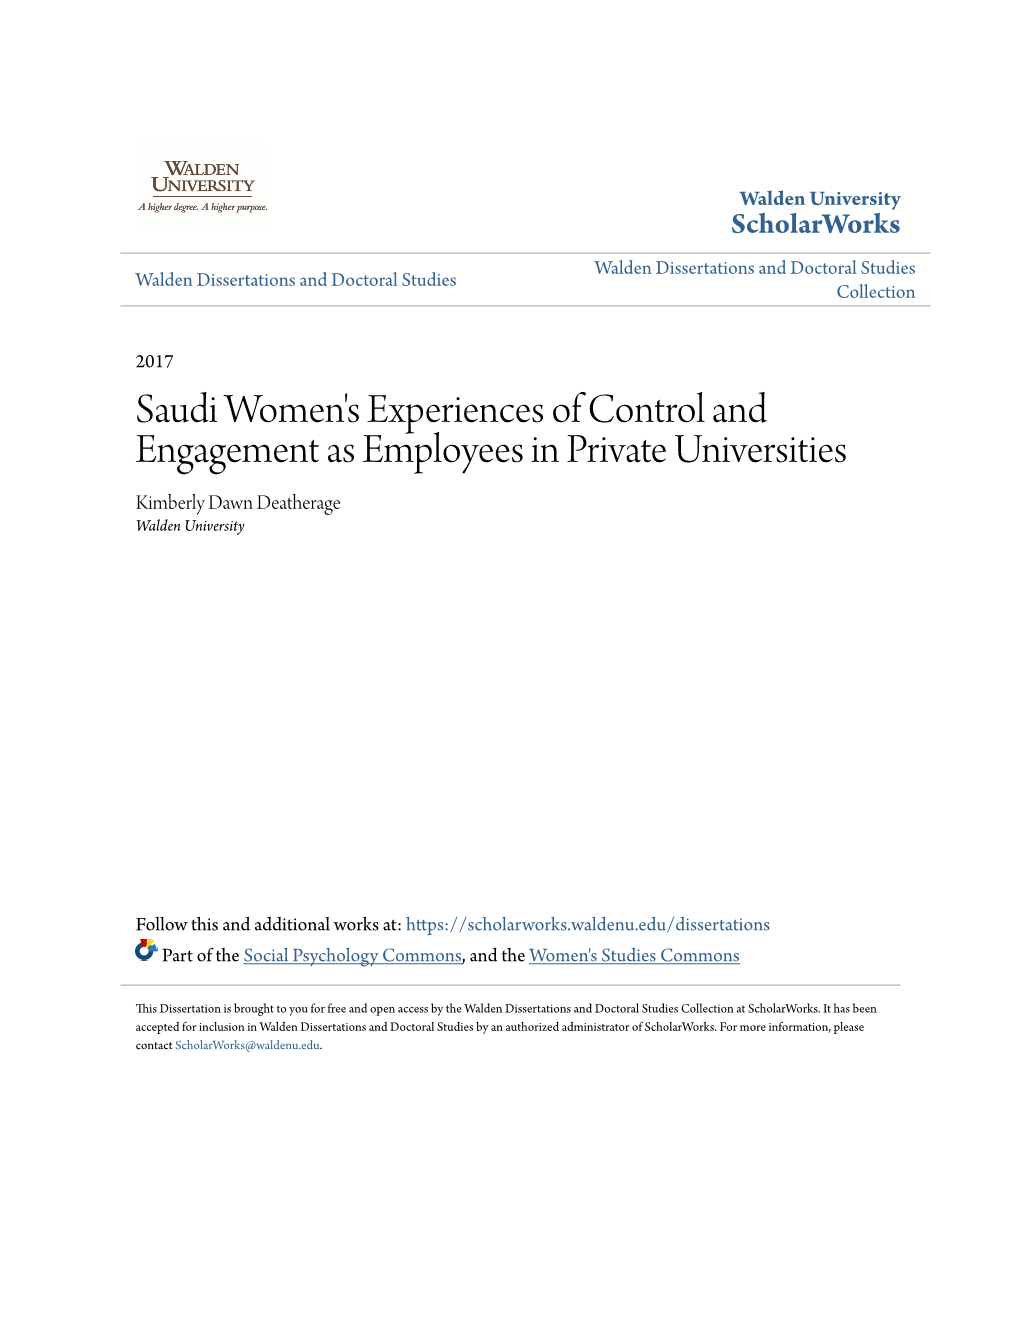 Saudi Women's Experiences of Control and Engagement As Employees in Private Universities Kimberly Dawn Deatherage Walden University